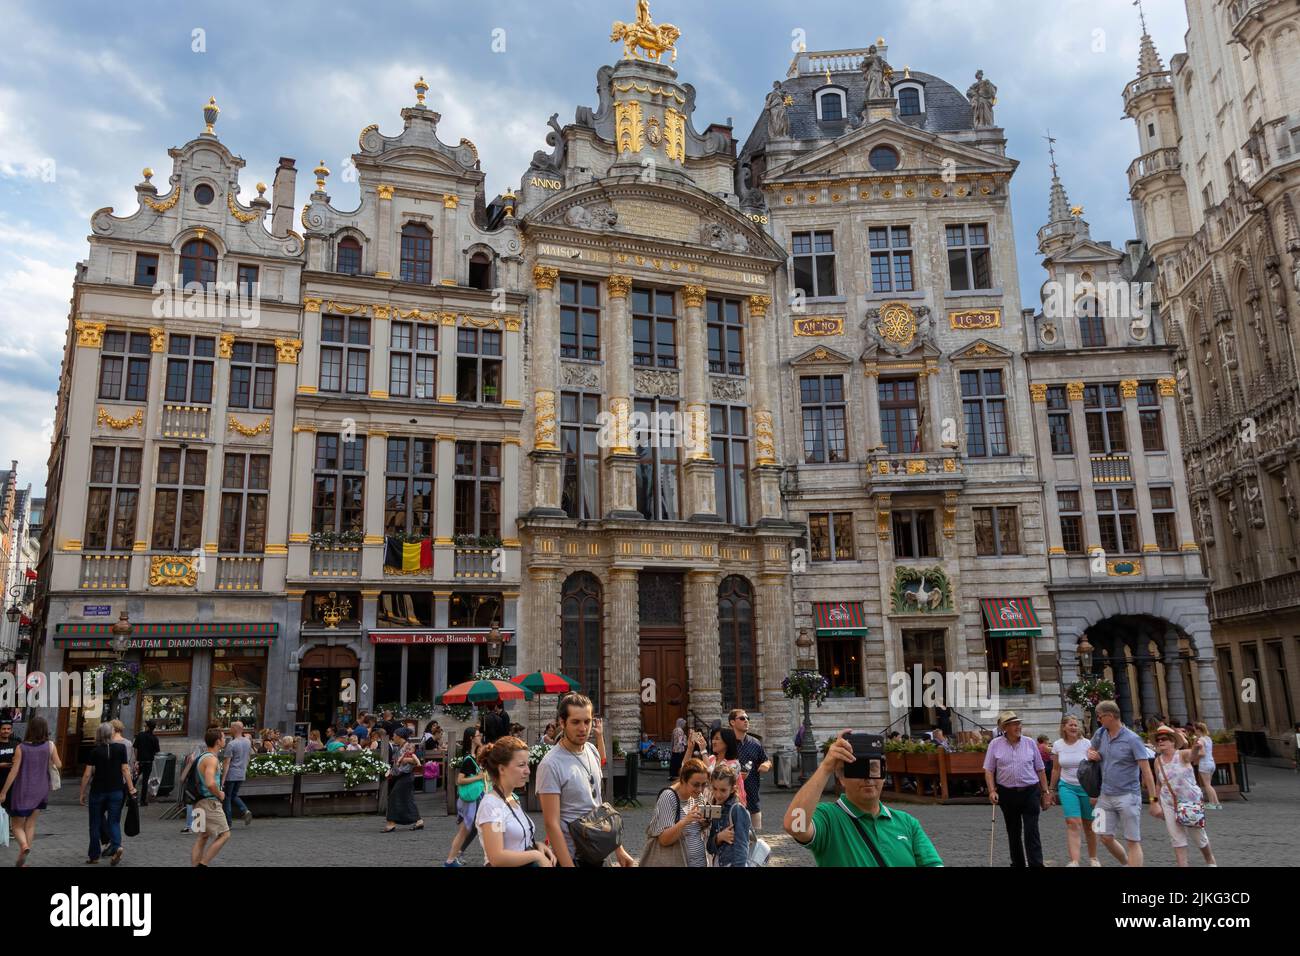 Brussels, Belgium - July 16, 2018: The Maison des Brasseurs (The House of Brewers, center) and  Mount Tabor (leftmost) at the Grand Place Stock Photo